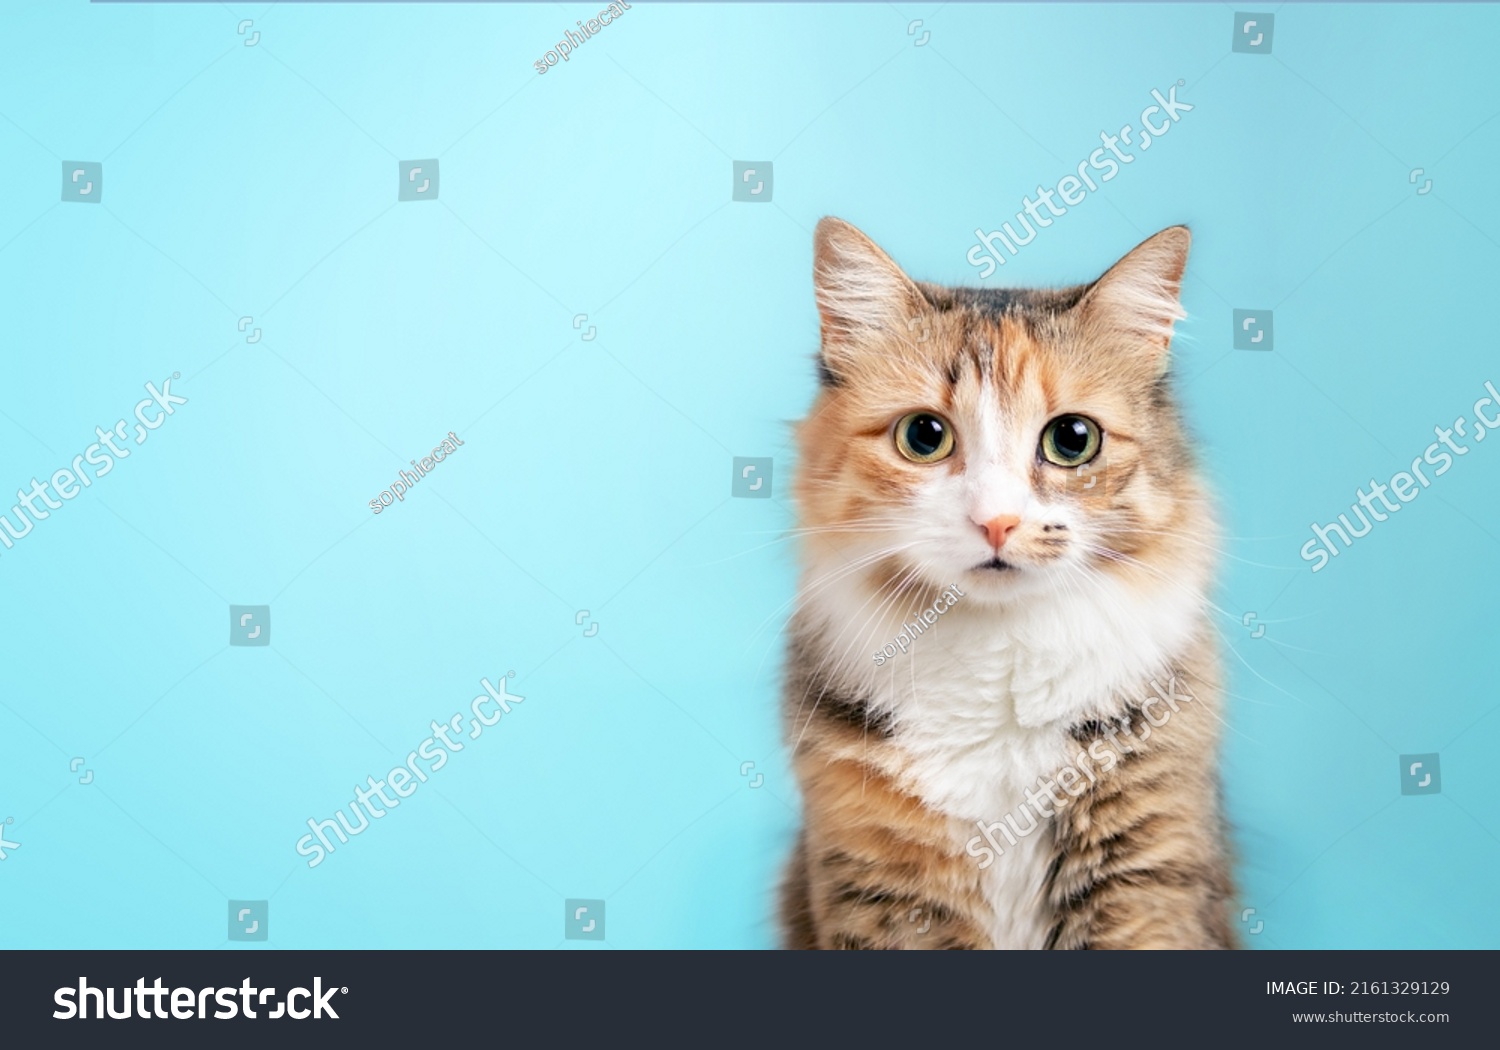 Fluffy kitty looking at camera on blue background, front view. Cute young  long hair calico or torbie cat sitting in front of colored background with copy space. 10 month old female kitten. Isolated. #2161329129